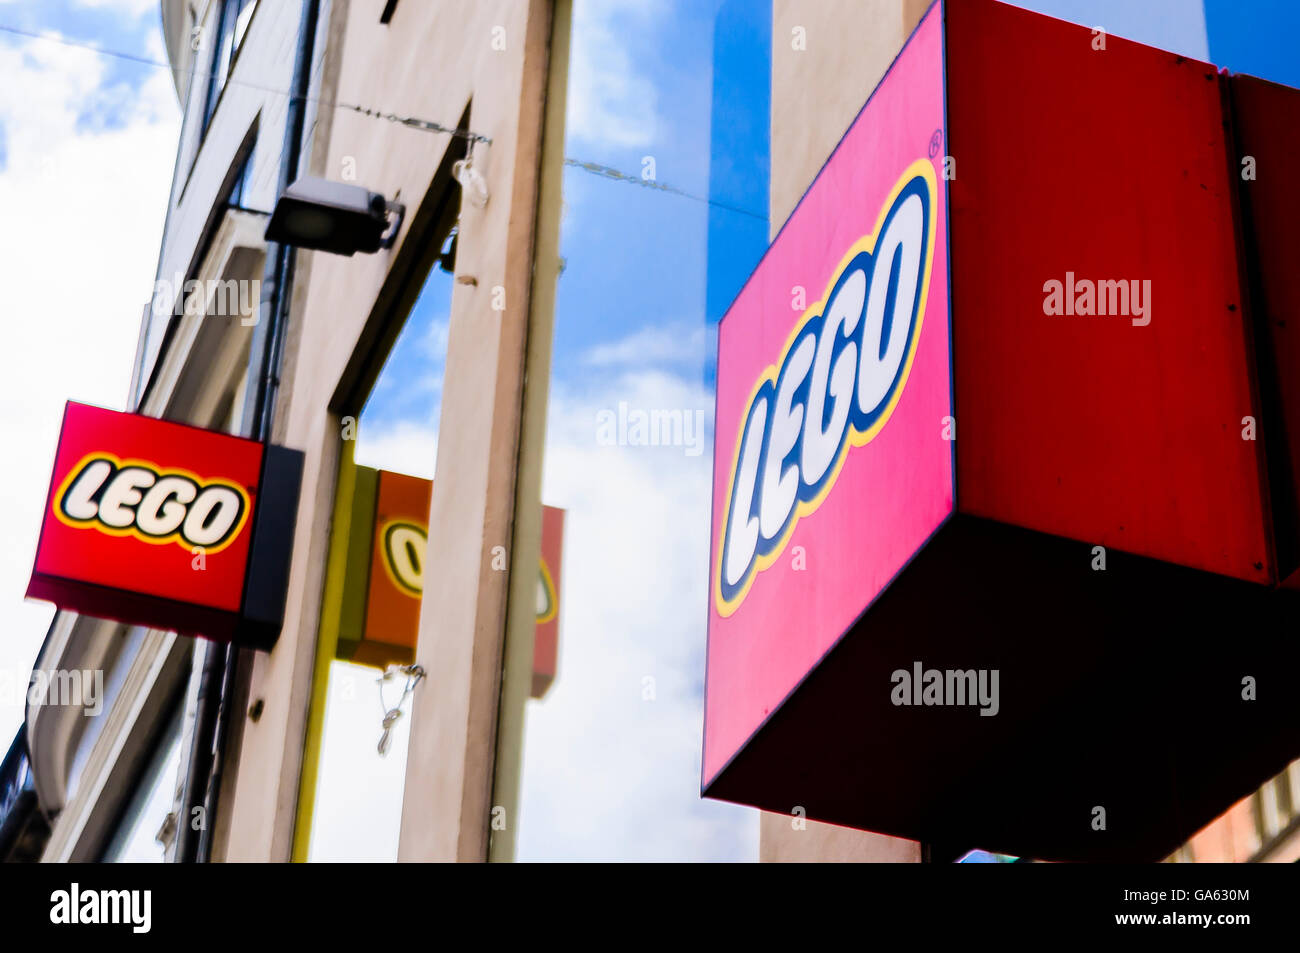 Signs outside the Lego shop store in Copehagen, Denmark Stock Photo